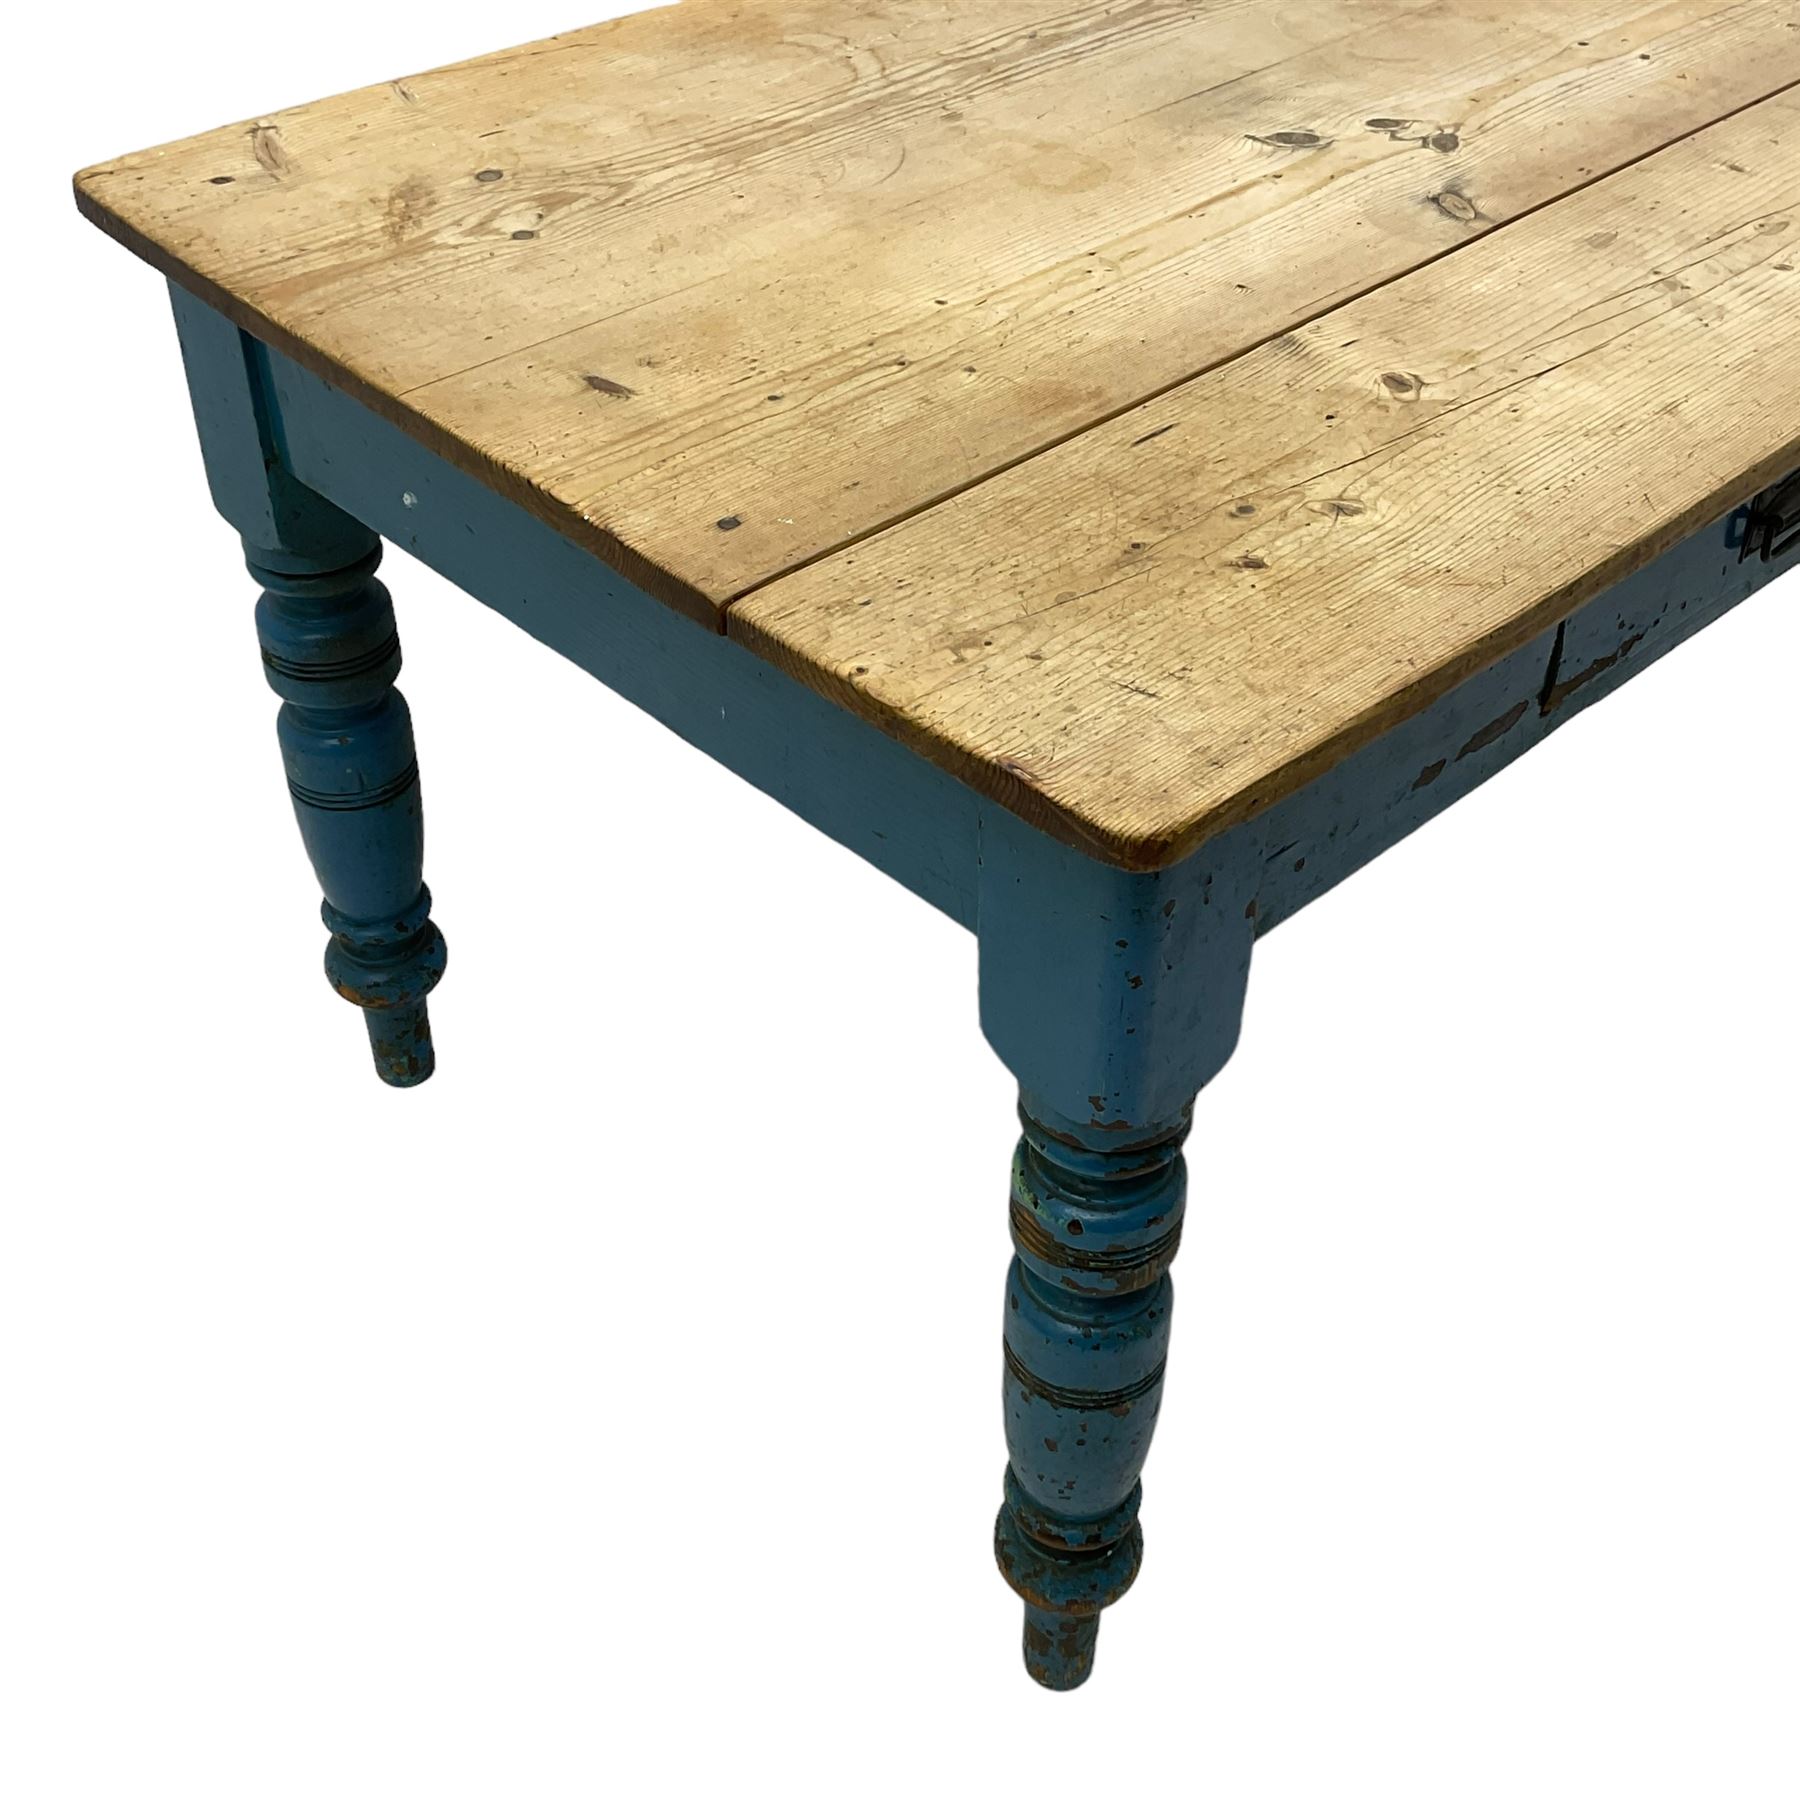 Victorian rustic painted pine kitchen table - Image 4 of 6